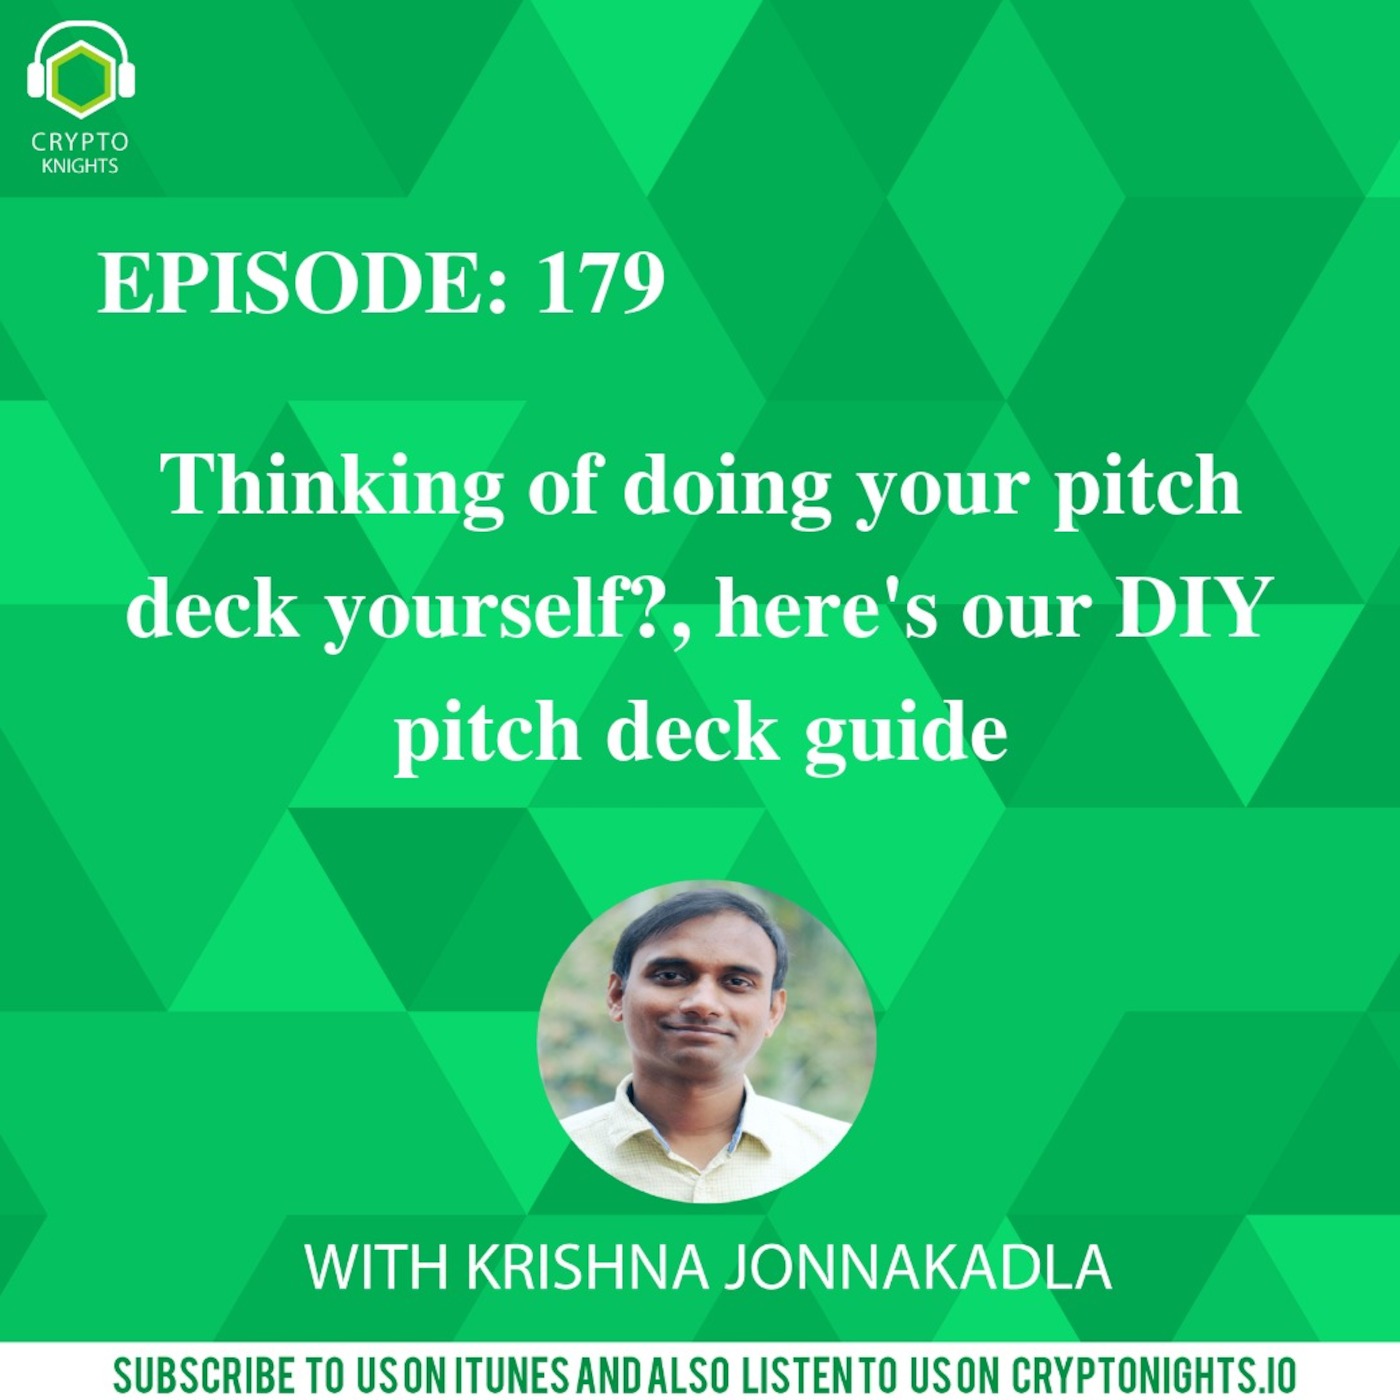 Episode 179: Thinking of doing your pitch deck yourself?, here’s our DIY pitch deck guide